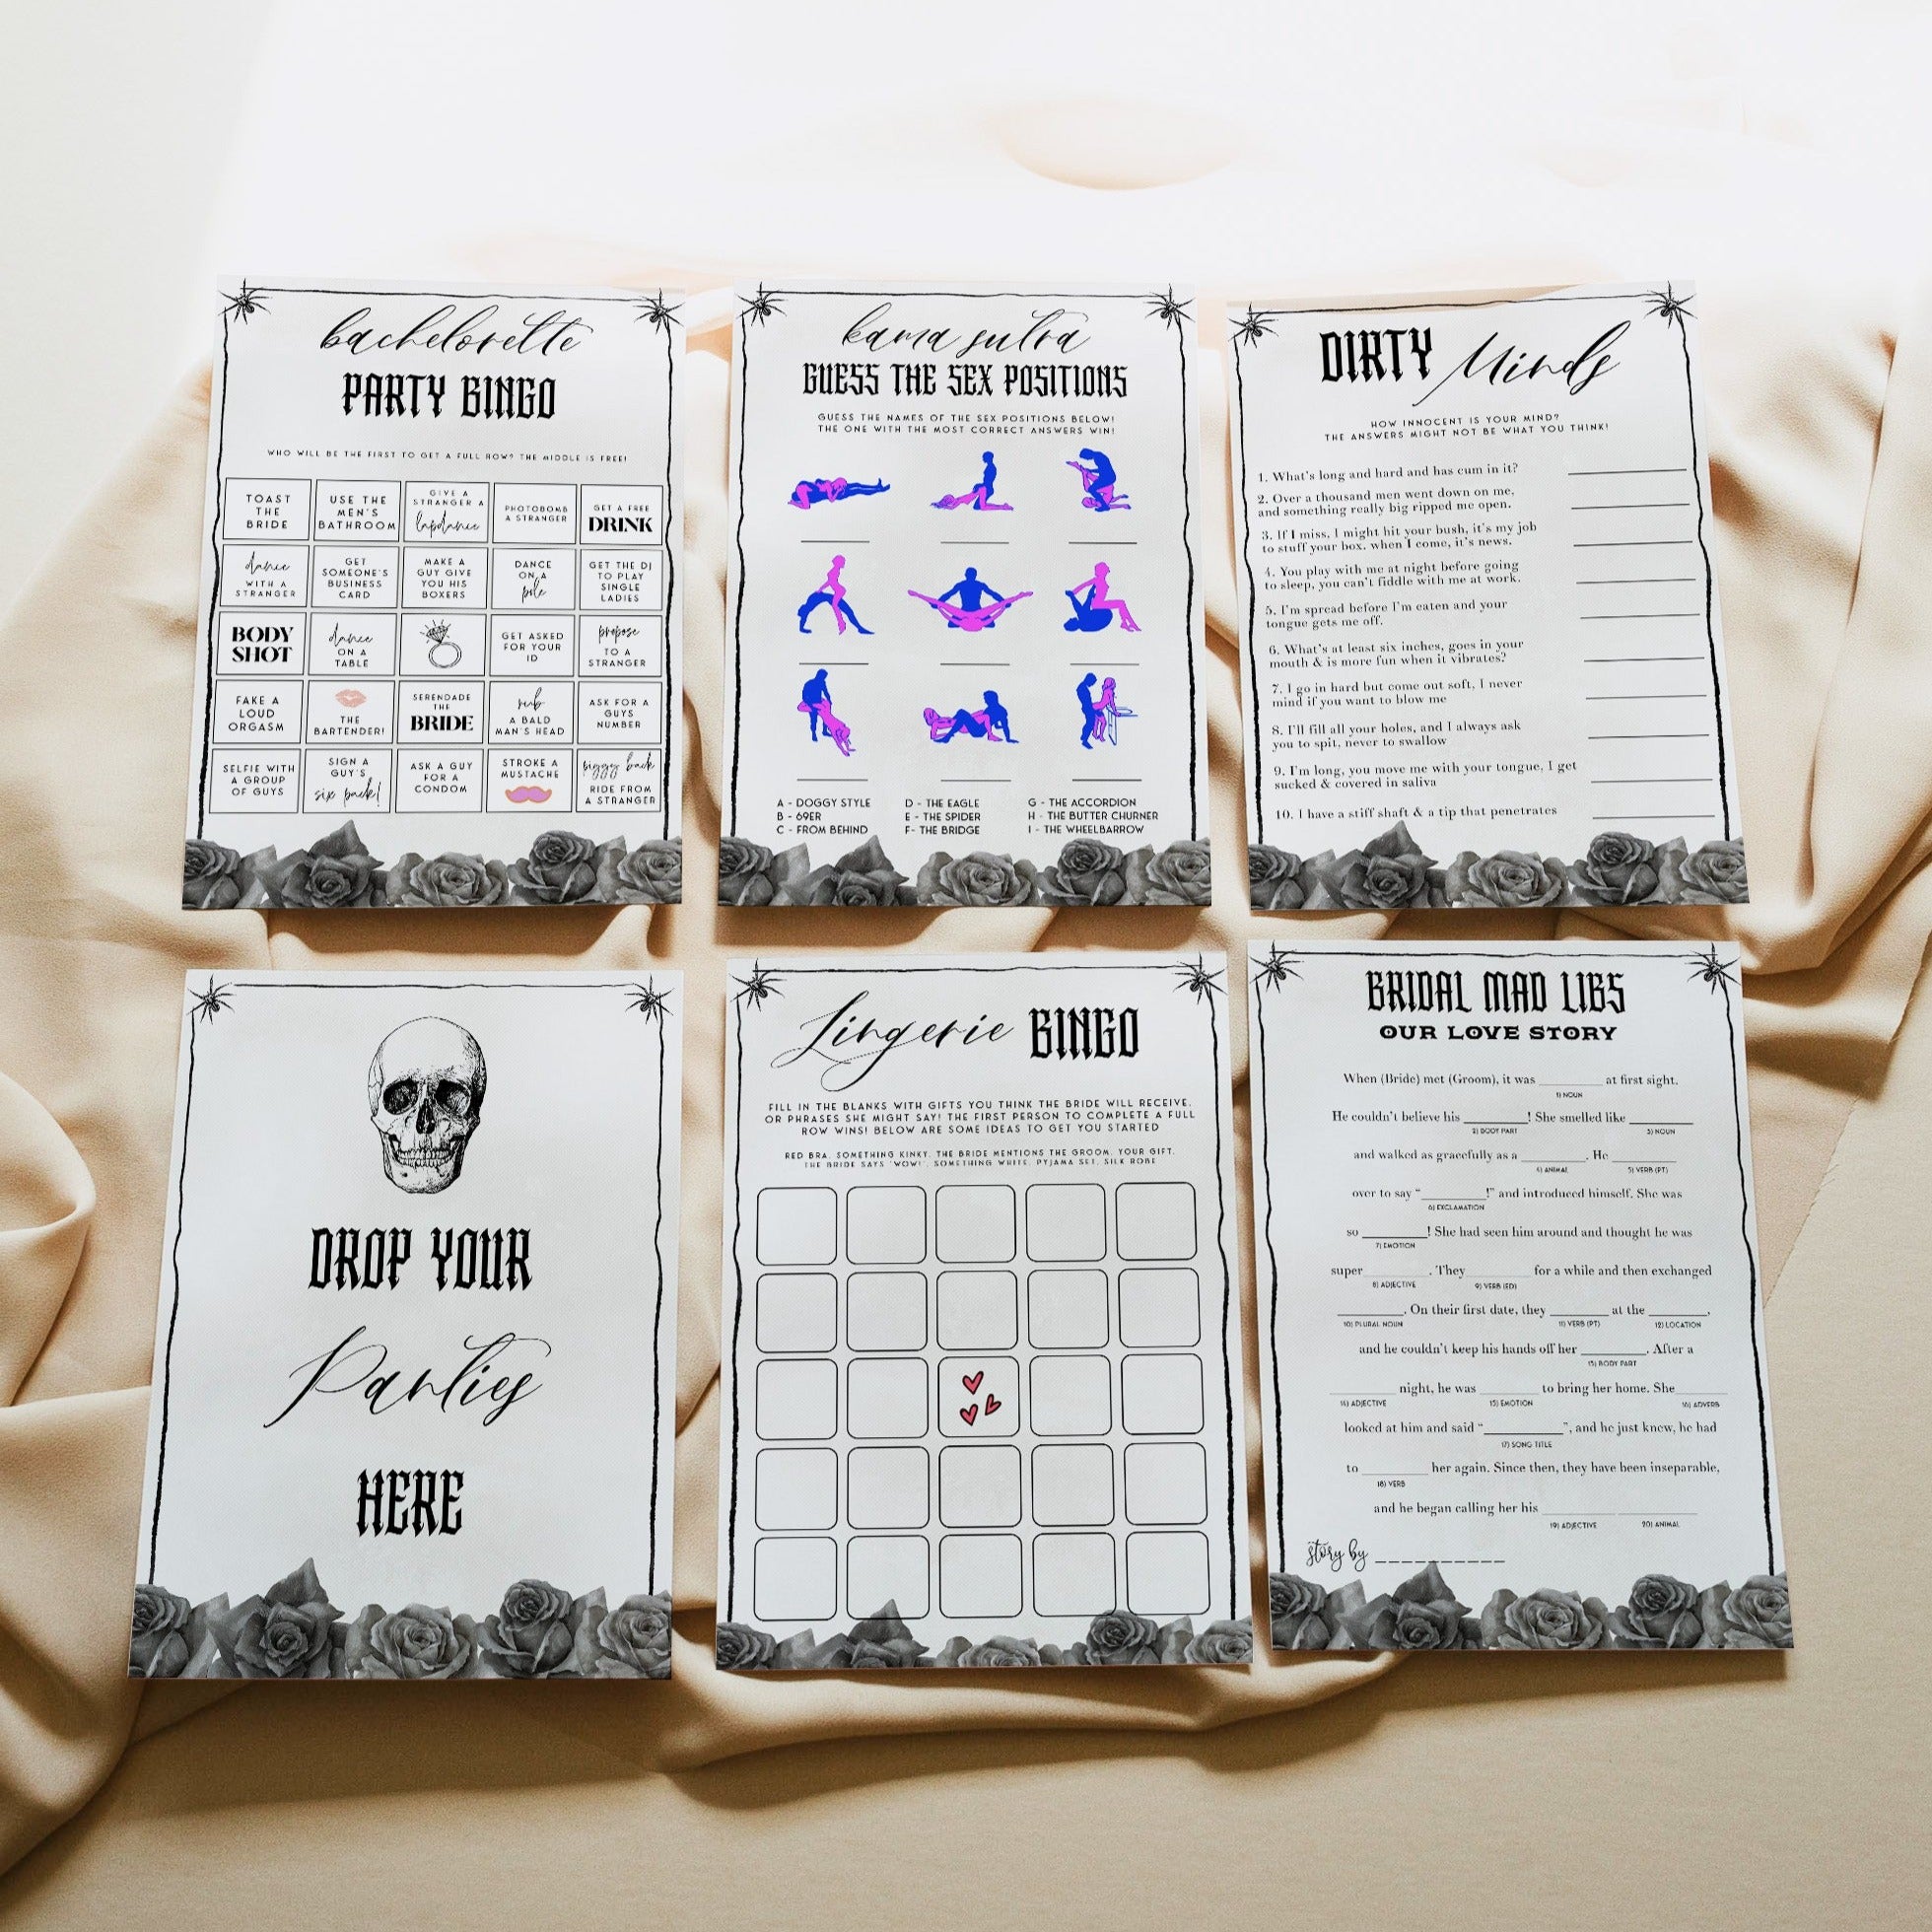 Fully editable and printable 40 bachelorette bride or die games with a gothic design. Perfect for a Bride or Die bachelorette themed party